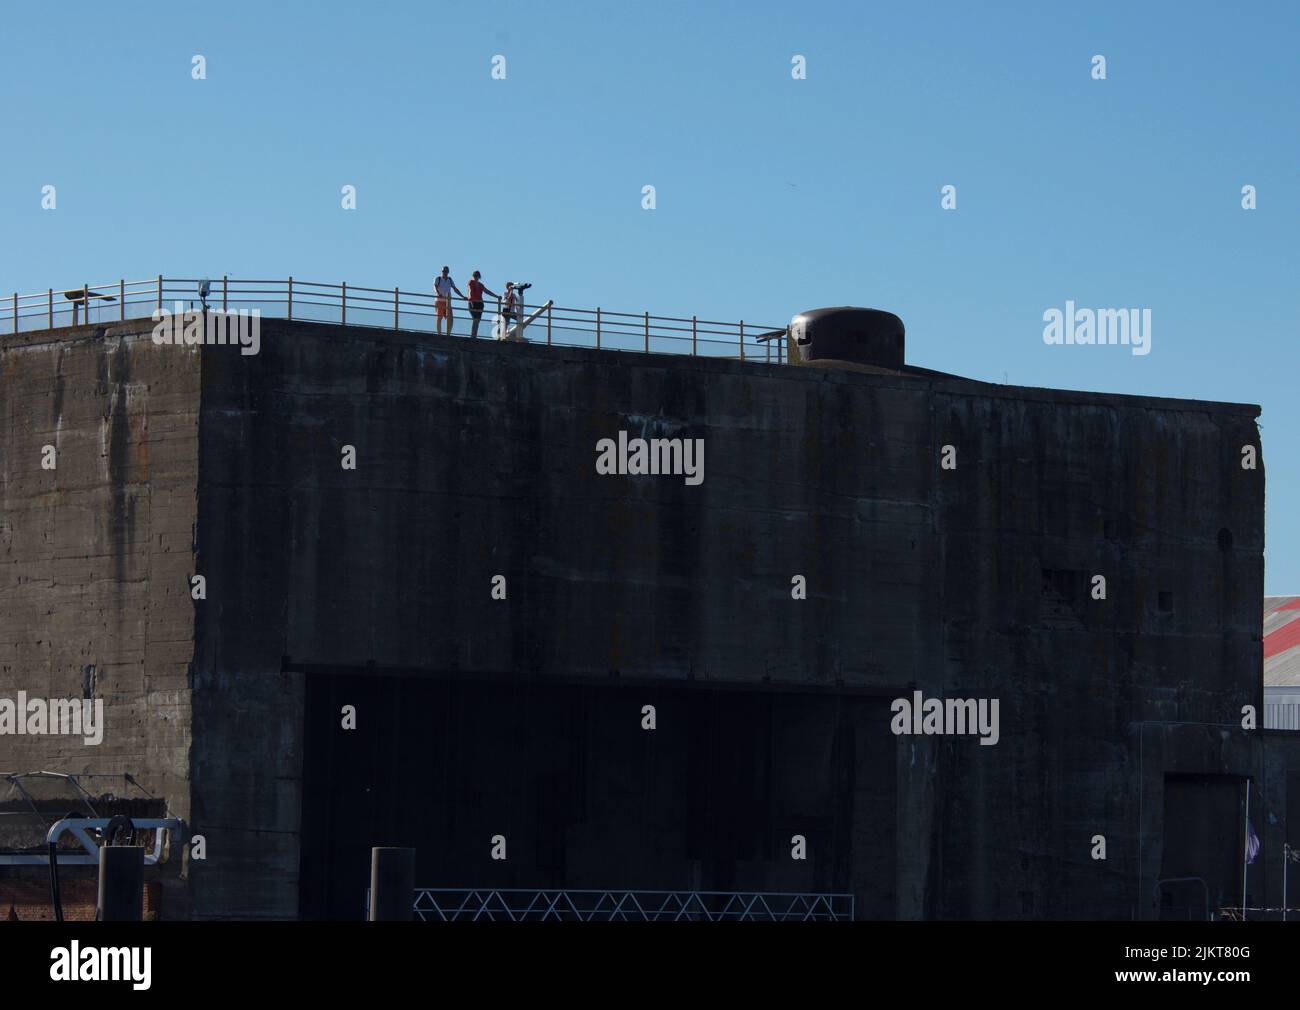 People watch from the top of a blaukaus in Saint-Nazaire. Estuary of the Loire river, France. Stock Photo